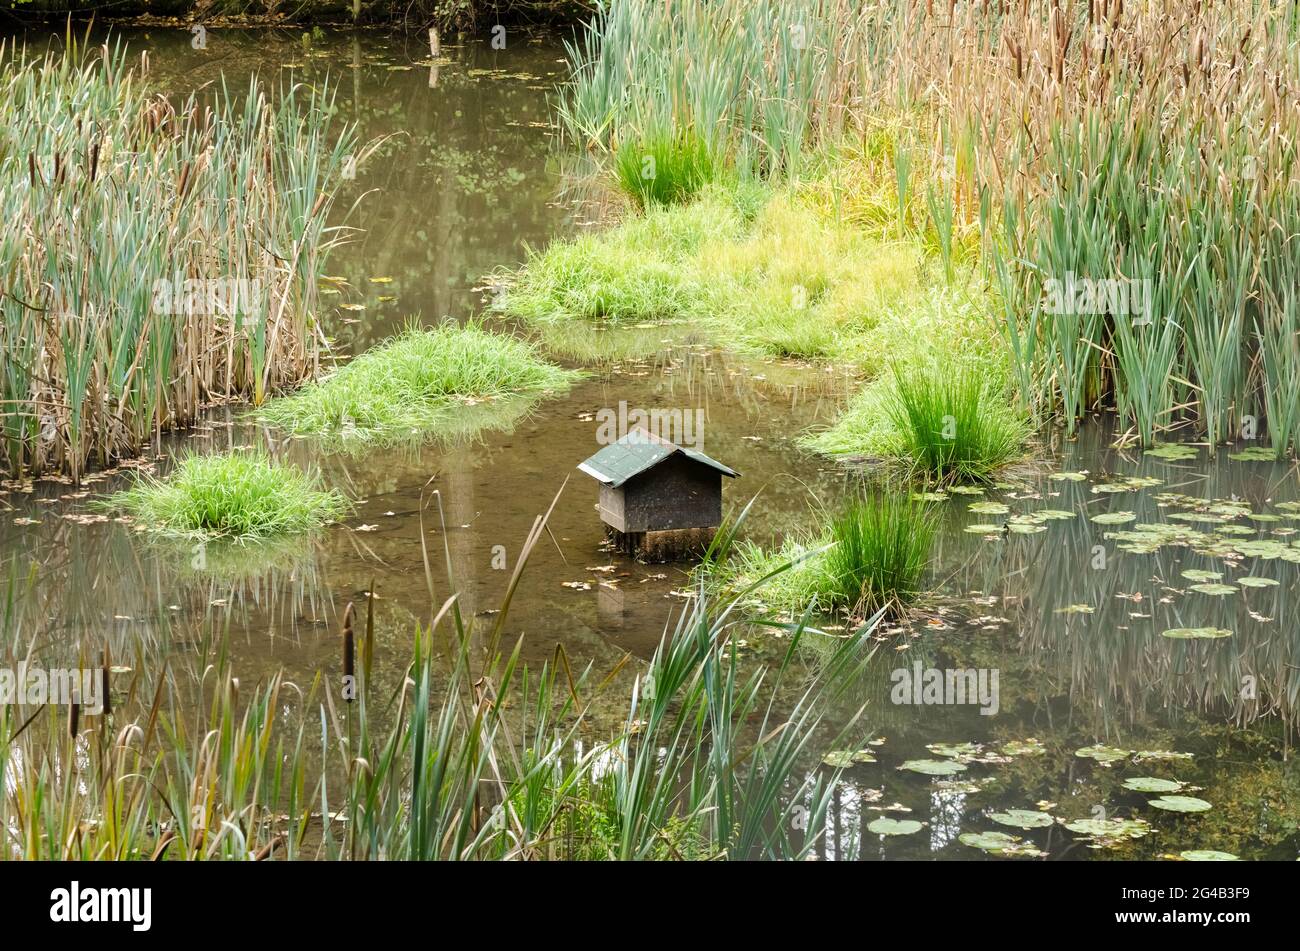 Small wooden duck house or shelter in a pond Stock Photo